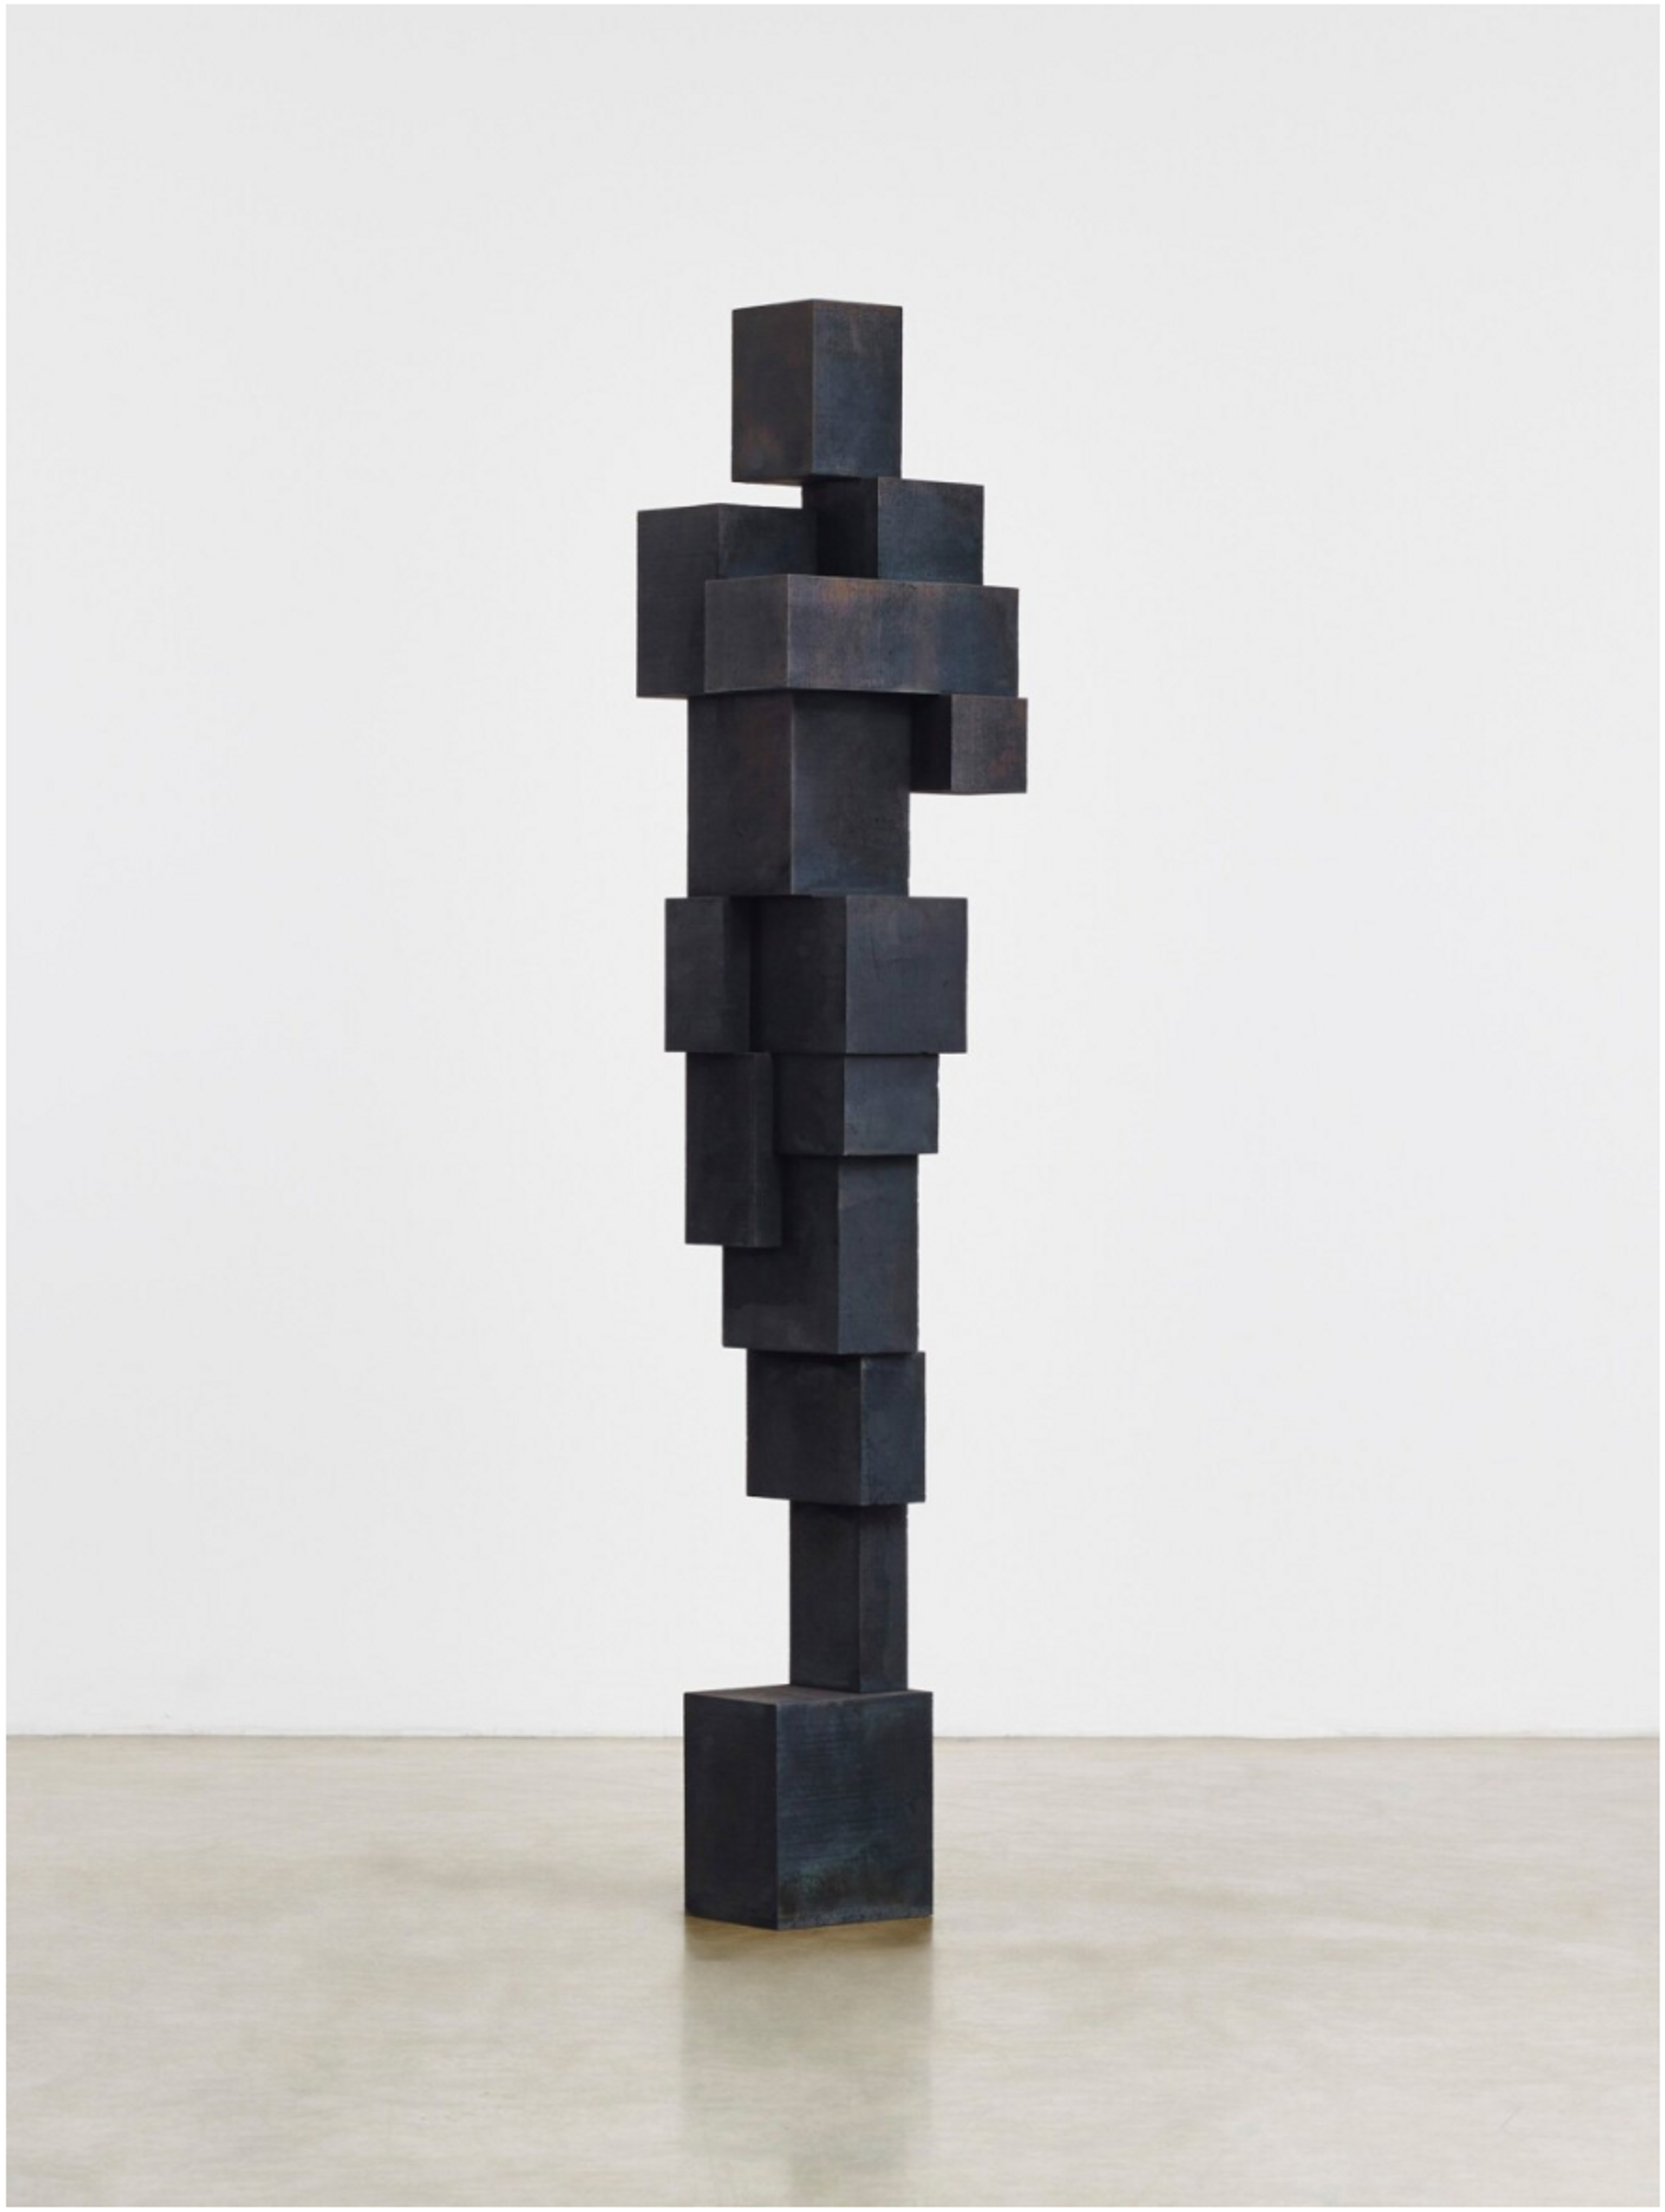  A life-sized sculpture of the human figure, devoid of any defining characteristics, capturing the essence of the human form. The sculpture is constructed using stacked iron blocks and is photographed in a white, empty gallery space.